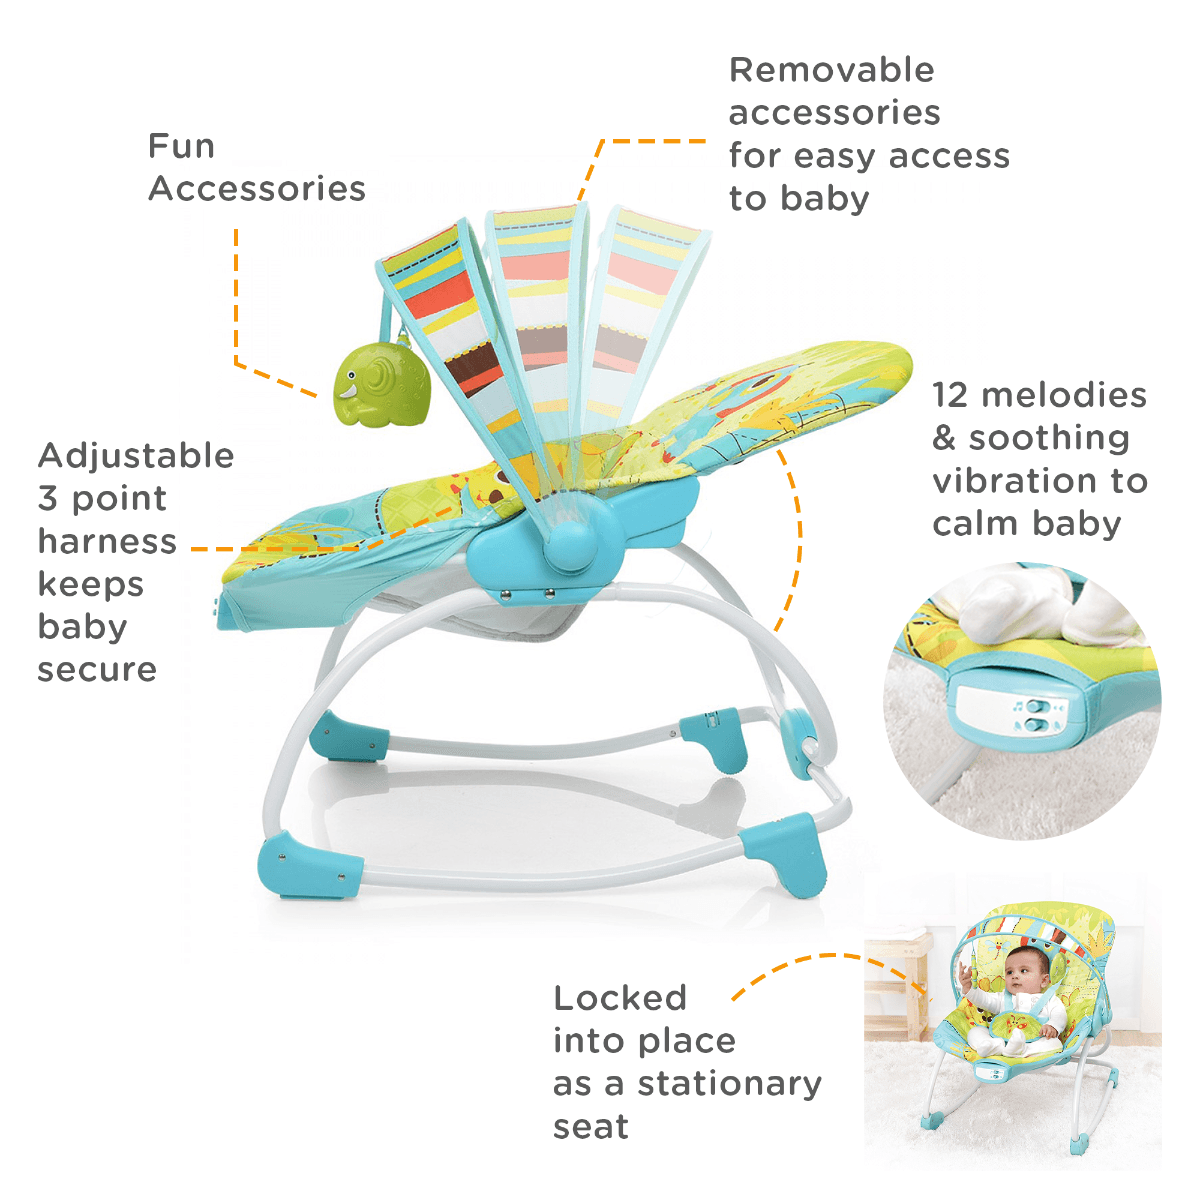 Mastela Baby Rocker Light Green - For Ages 0-3 Years